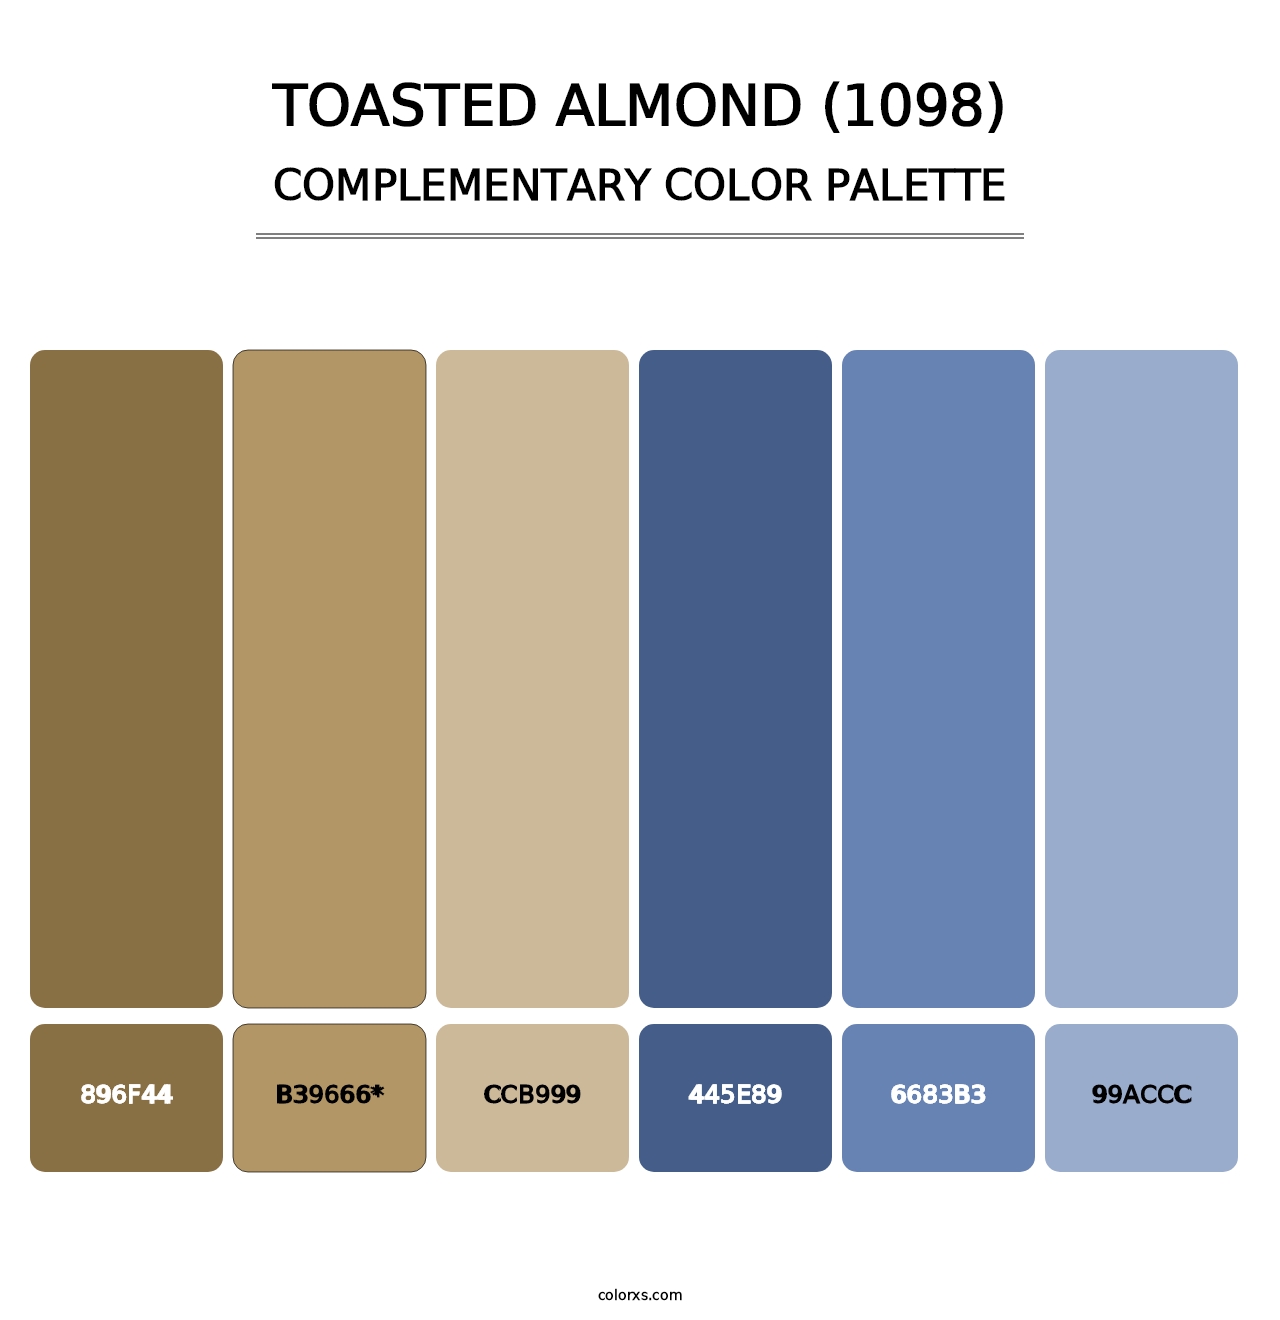 Toasted Almond (1098) - Complementary Color Palette